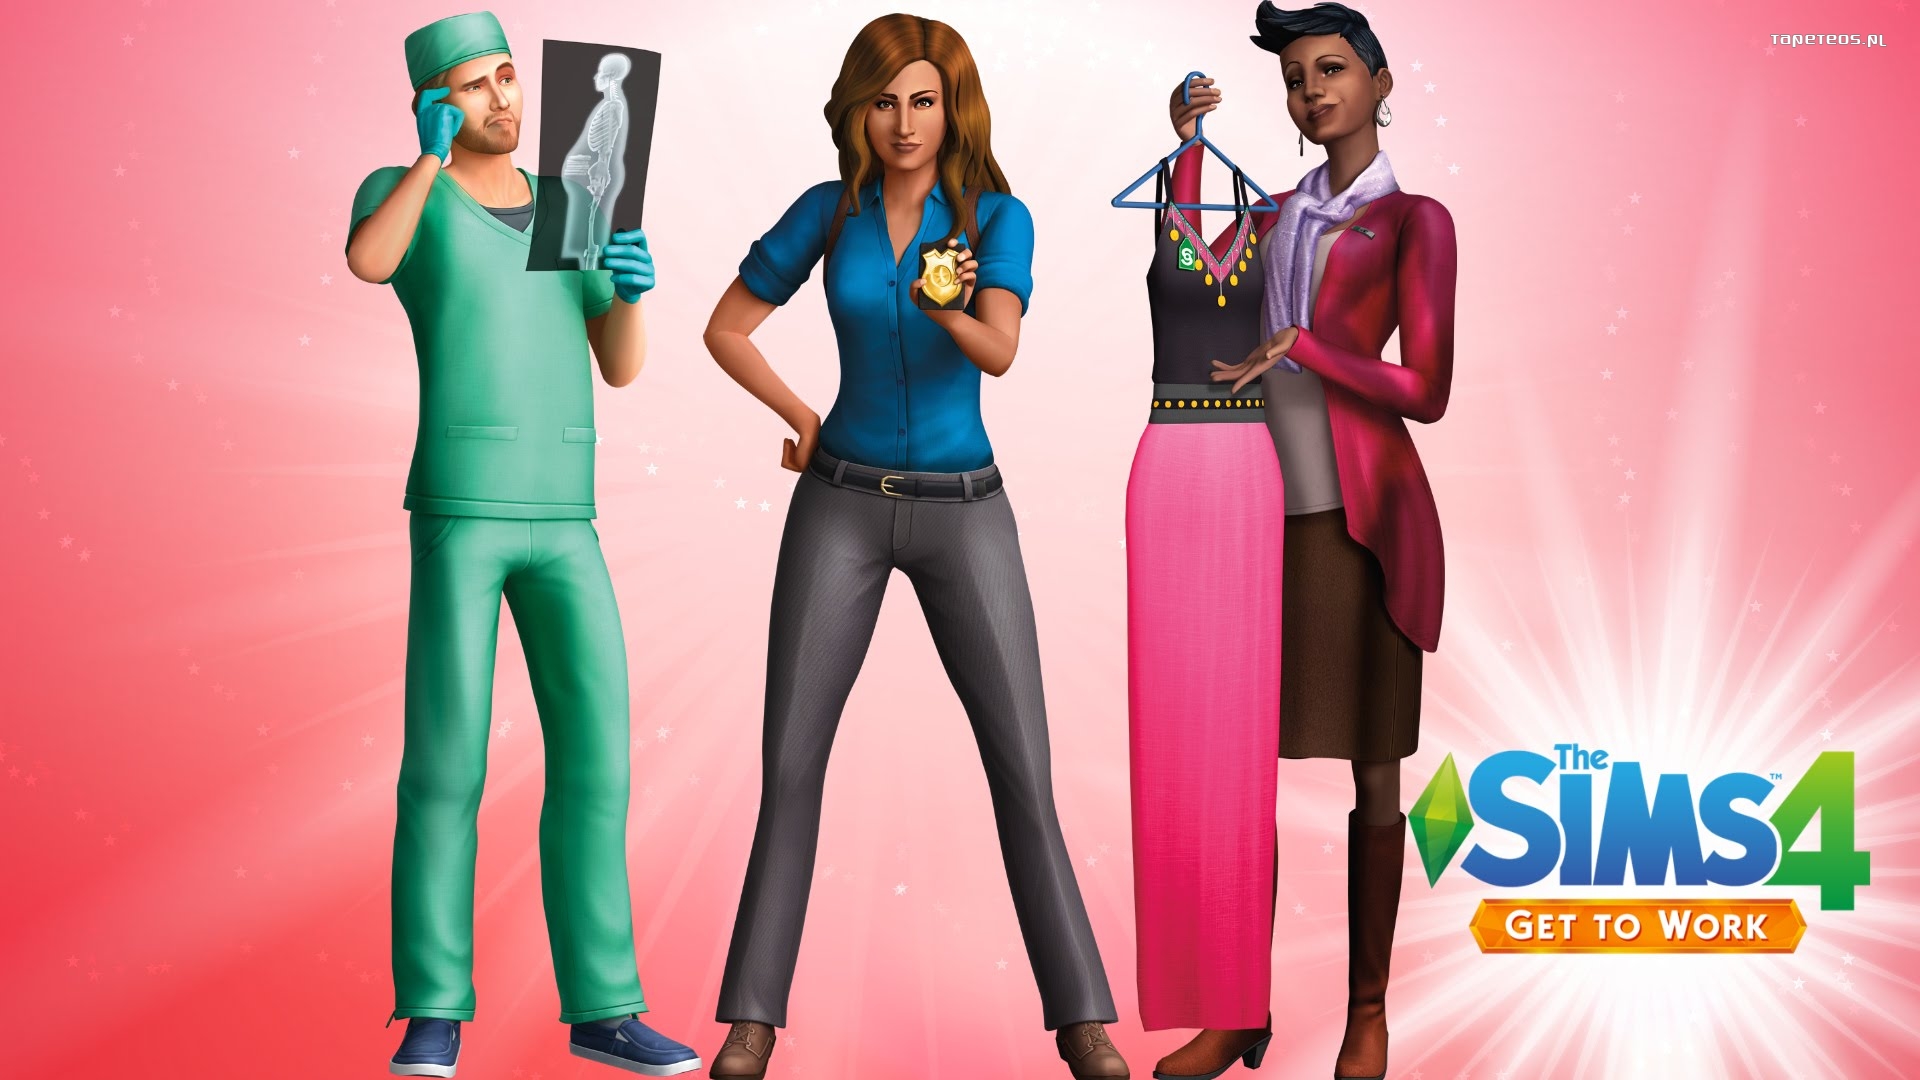 The Sims 4 Get to Work 005